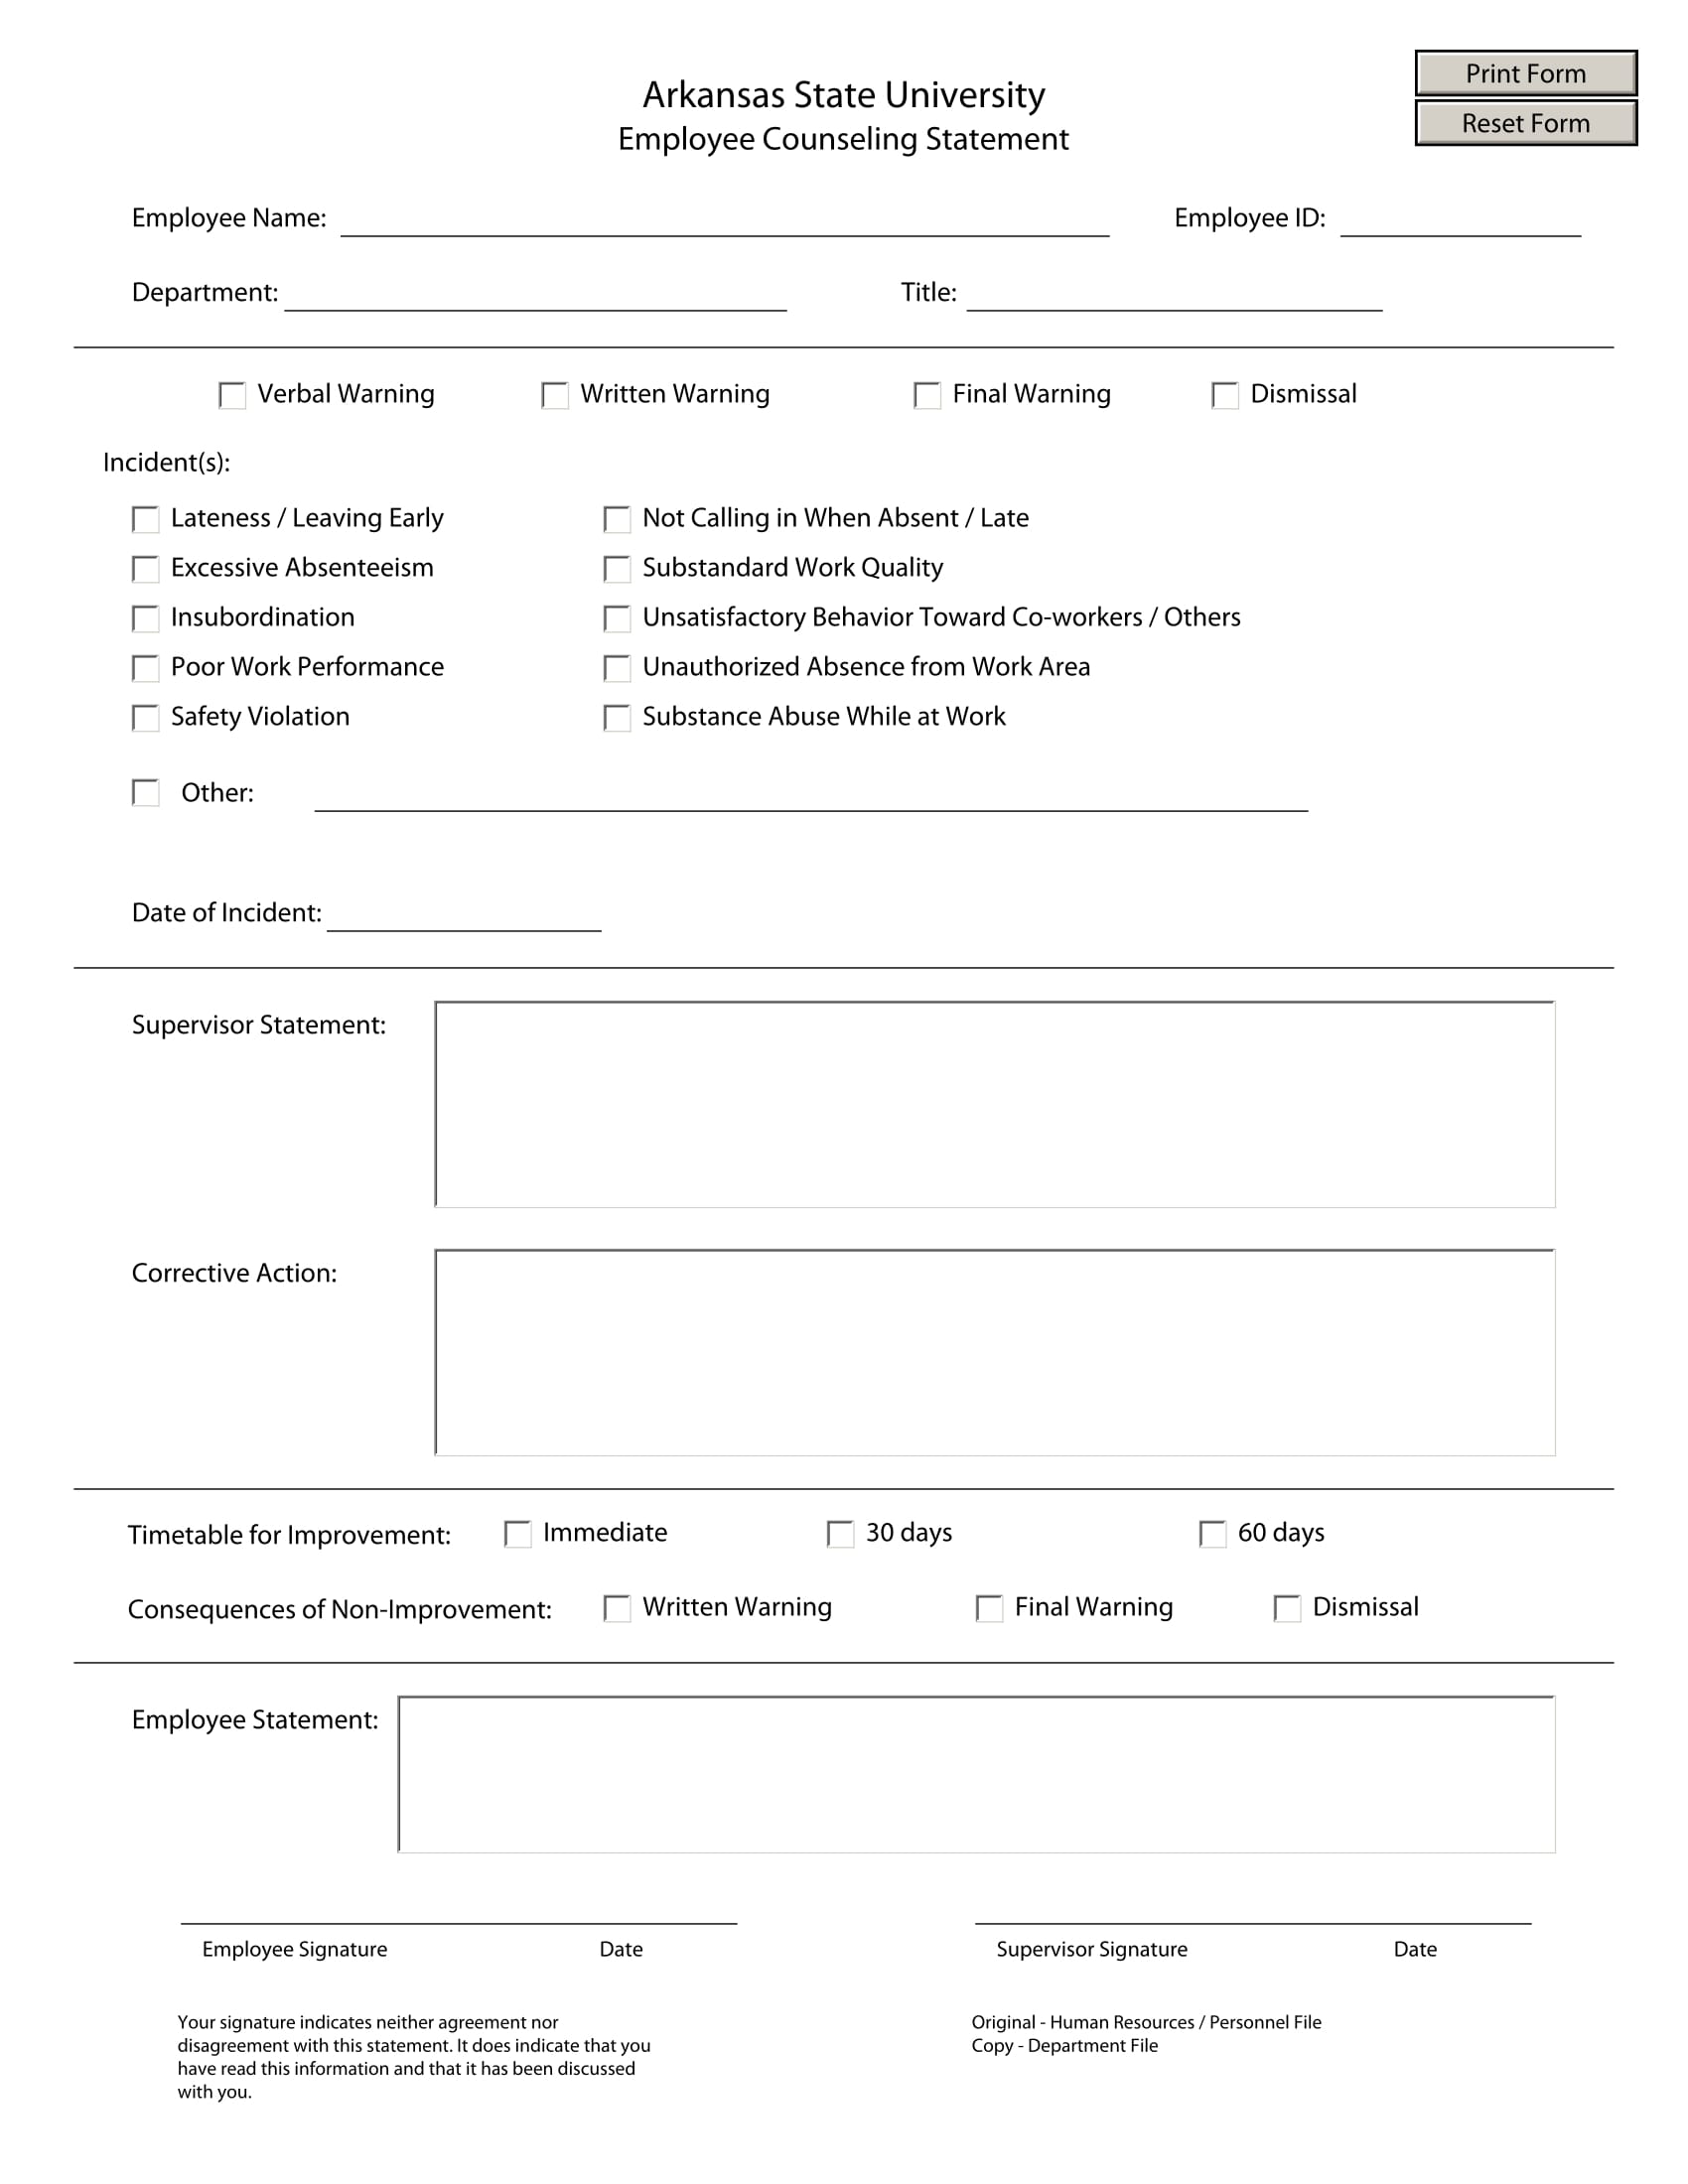 employee counseling statement form 1